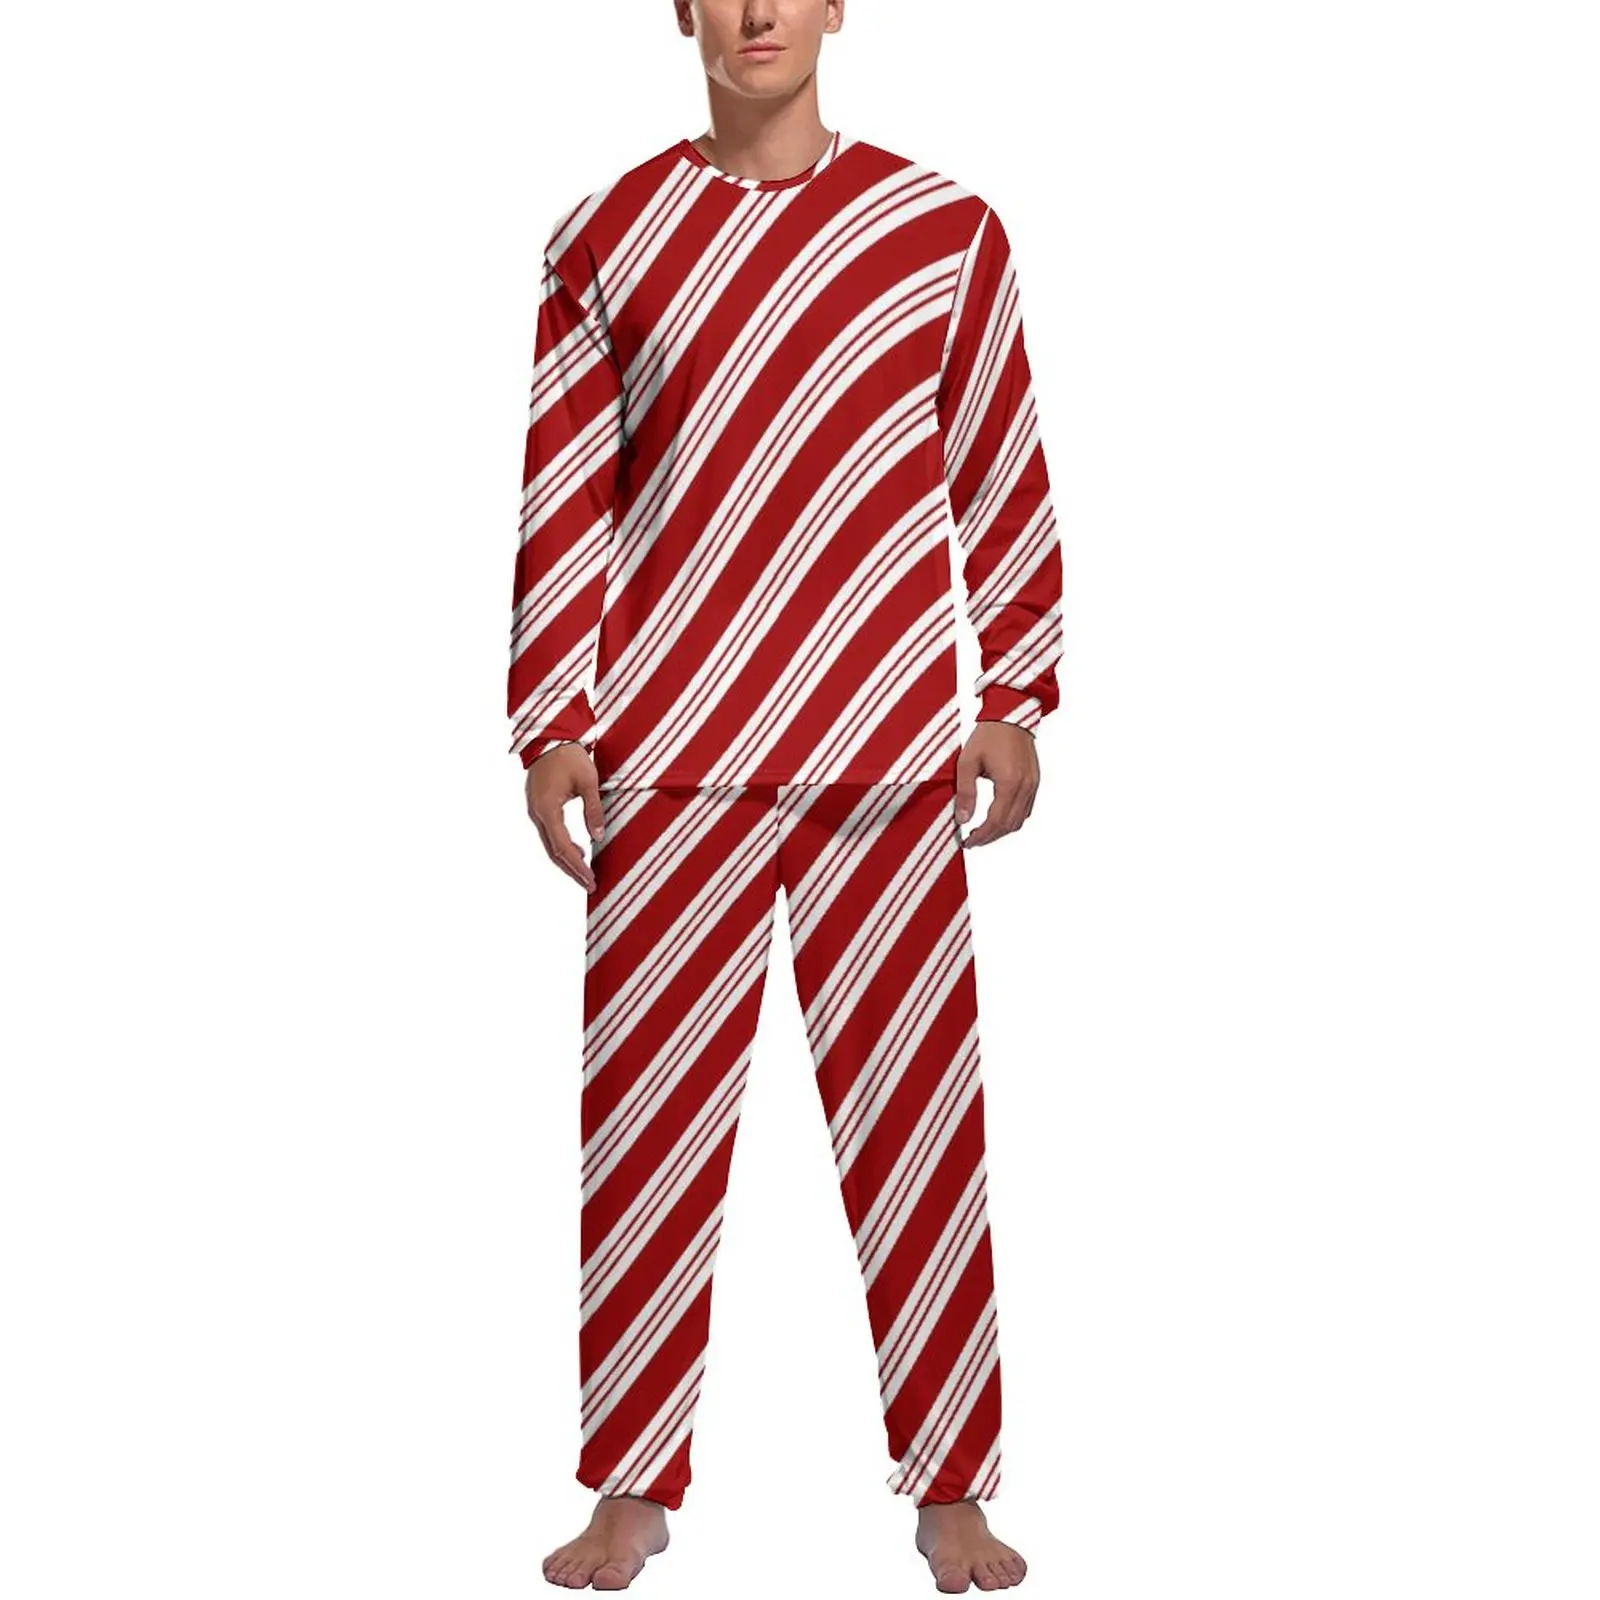 

Red Line Pajamas Daily 2 Pieces Christmas Candy Cane Stripes Romantic Pajama Sets Men Long-Sleeve Aesthetic Design Home Suit